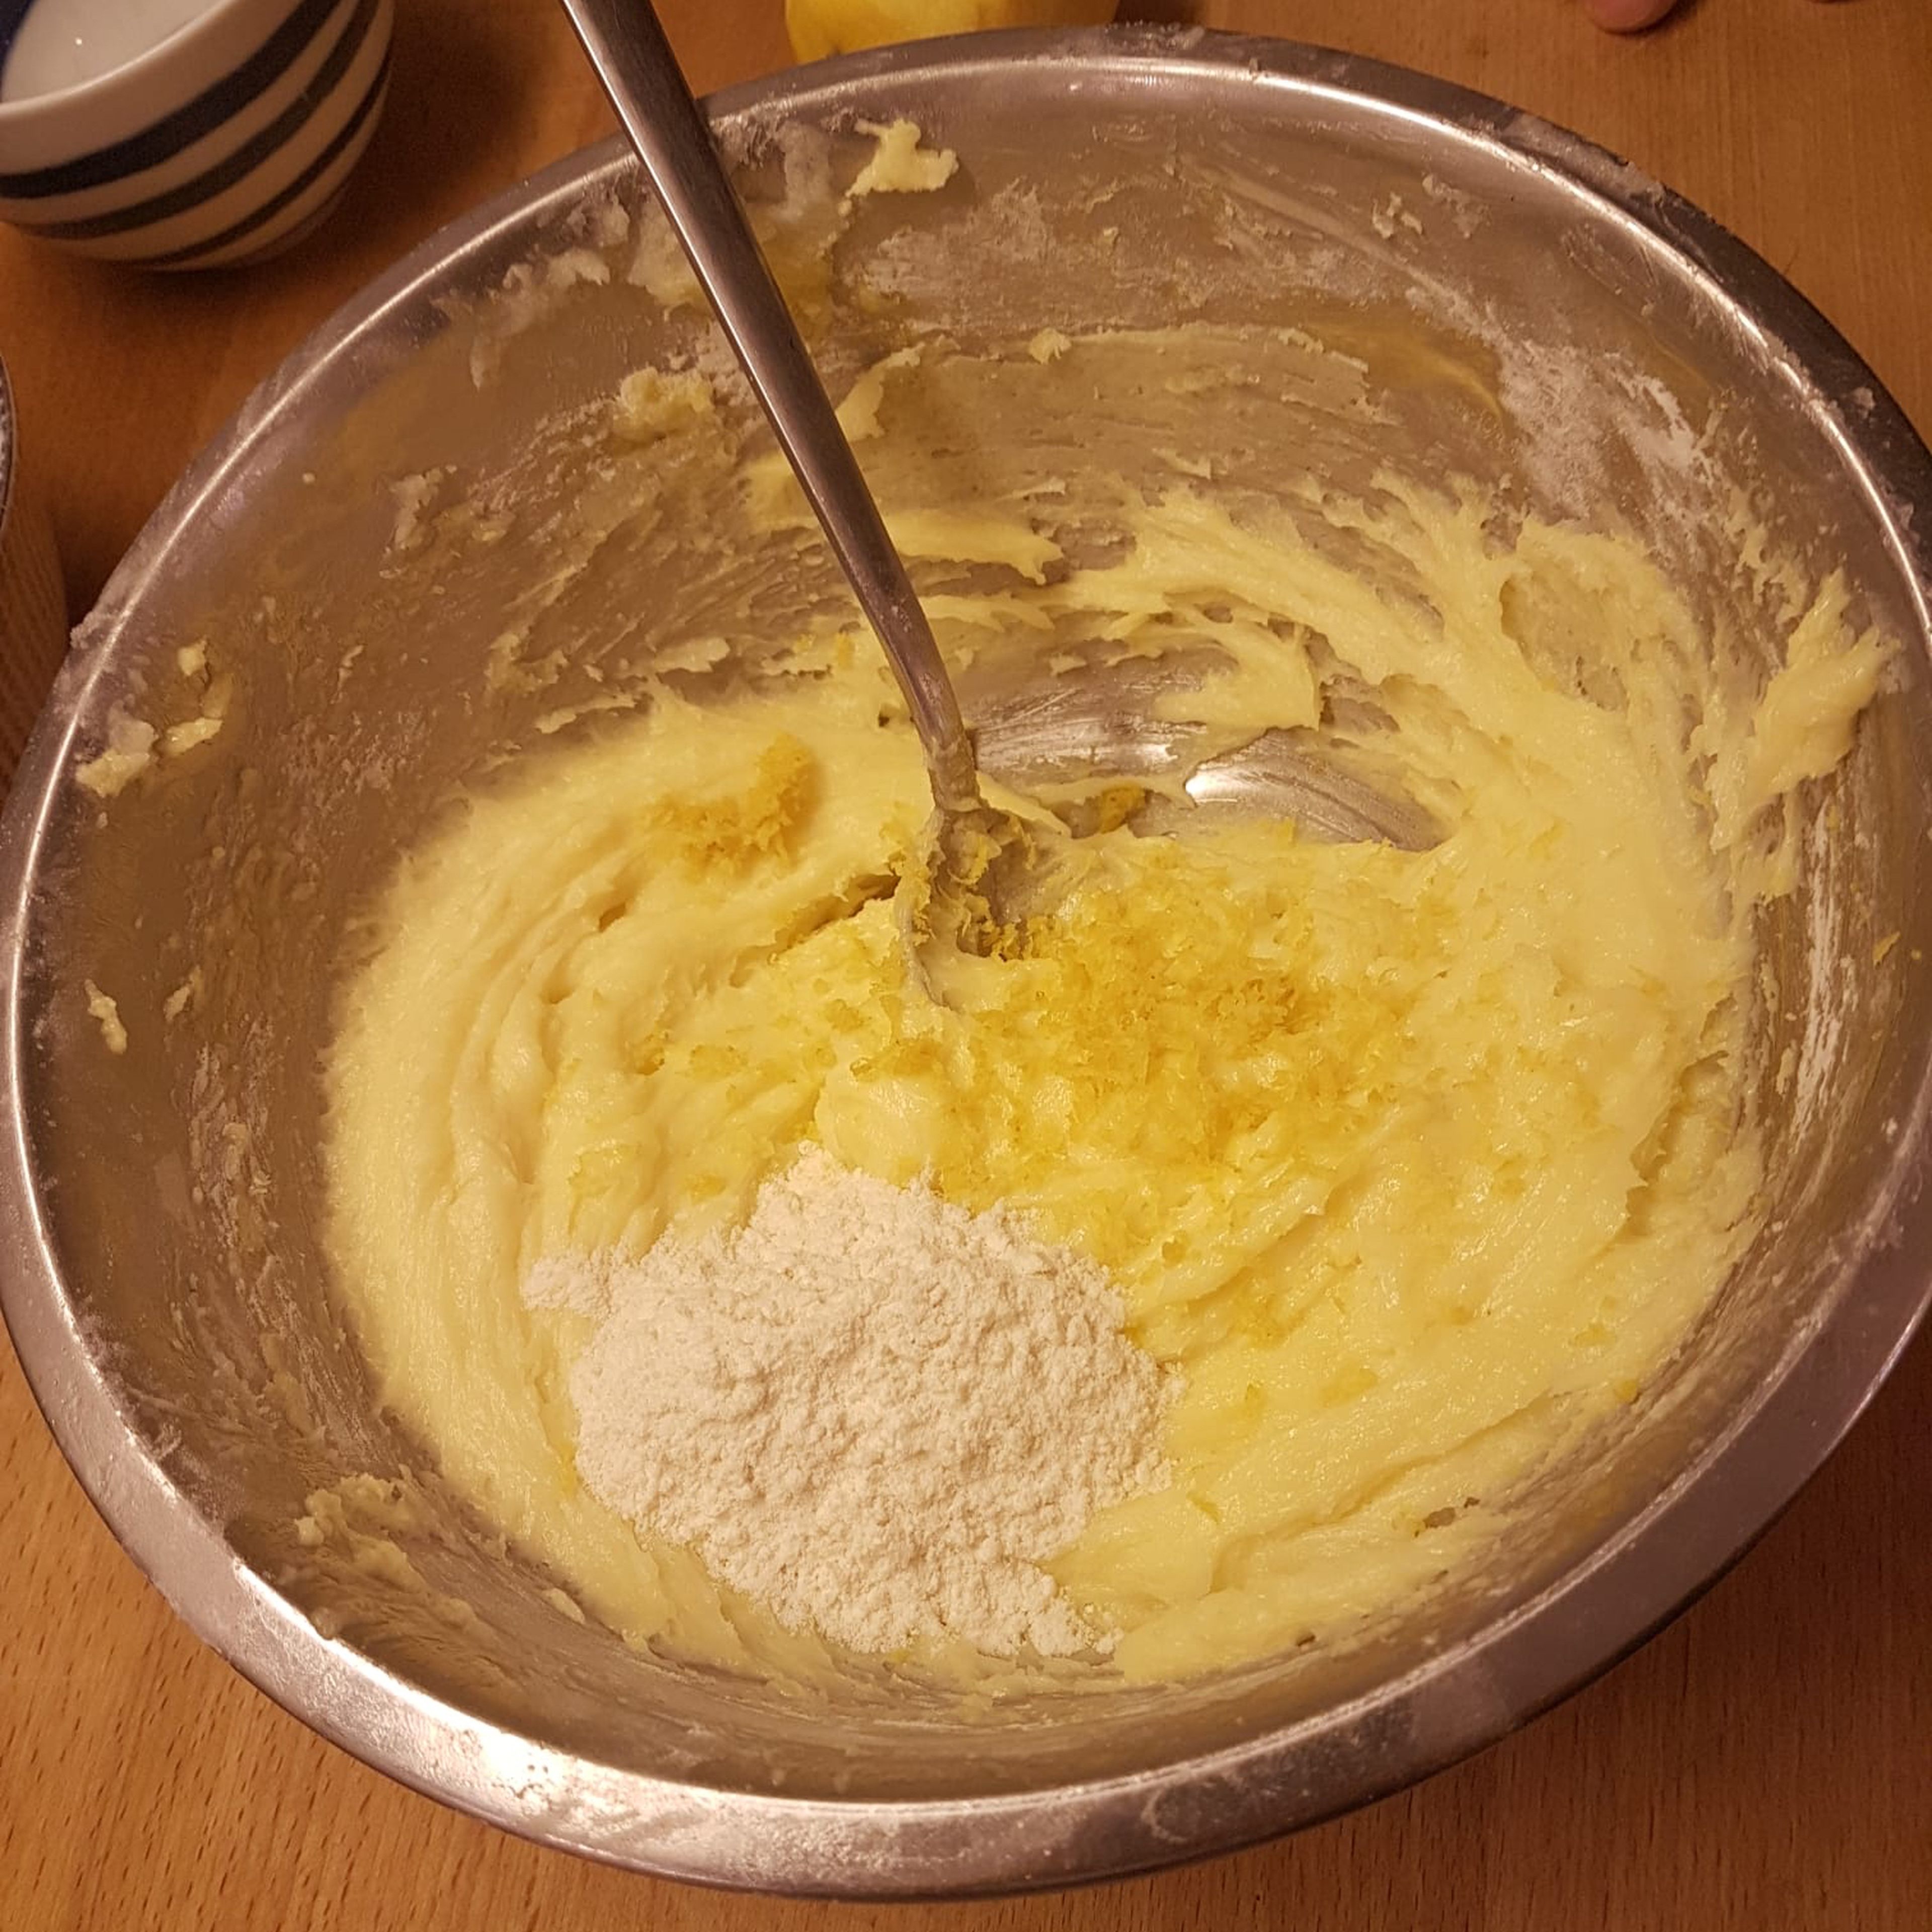 After the starch has been well absorbed, add the grated lemon peel, the baking powder and the spoonful of flour. Mix everything until absorbed